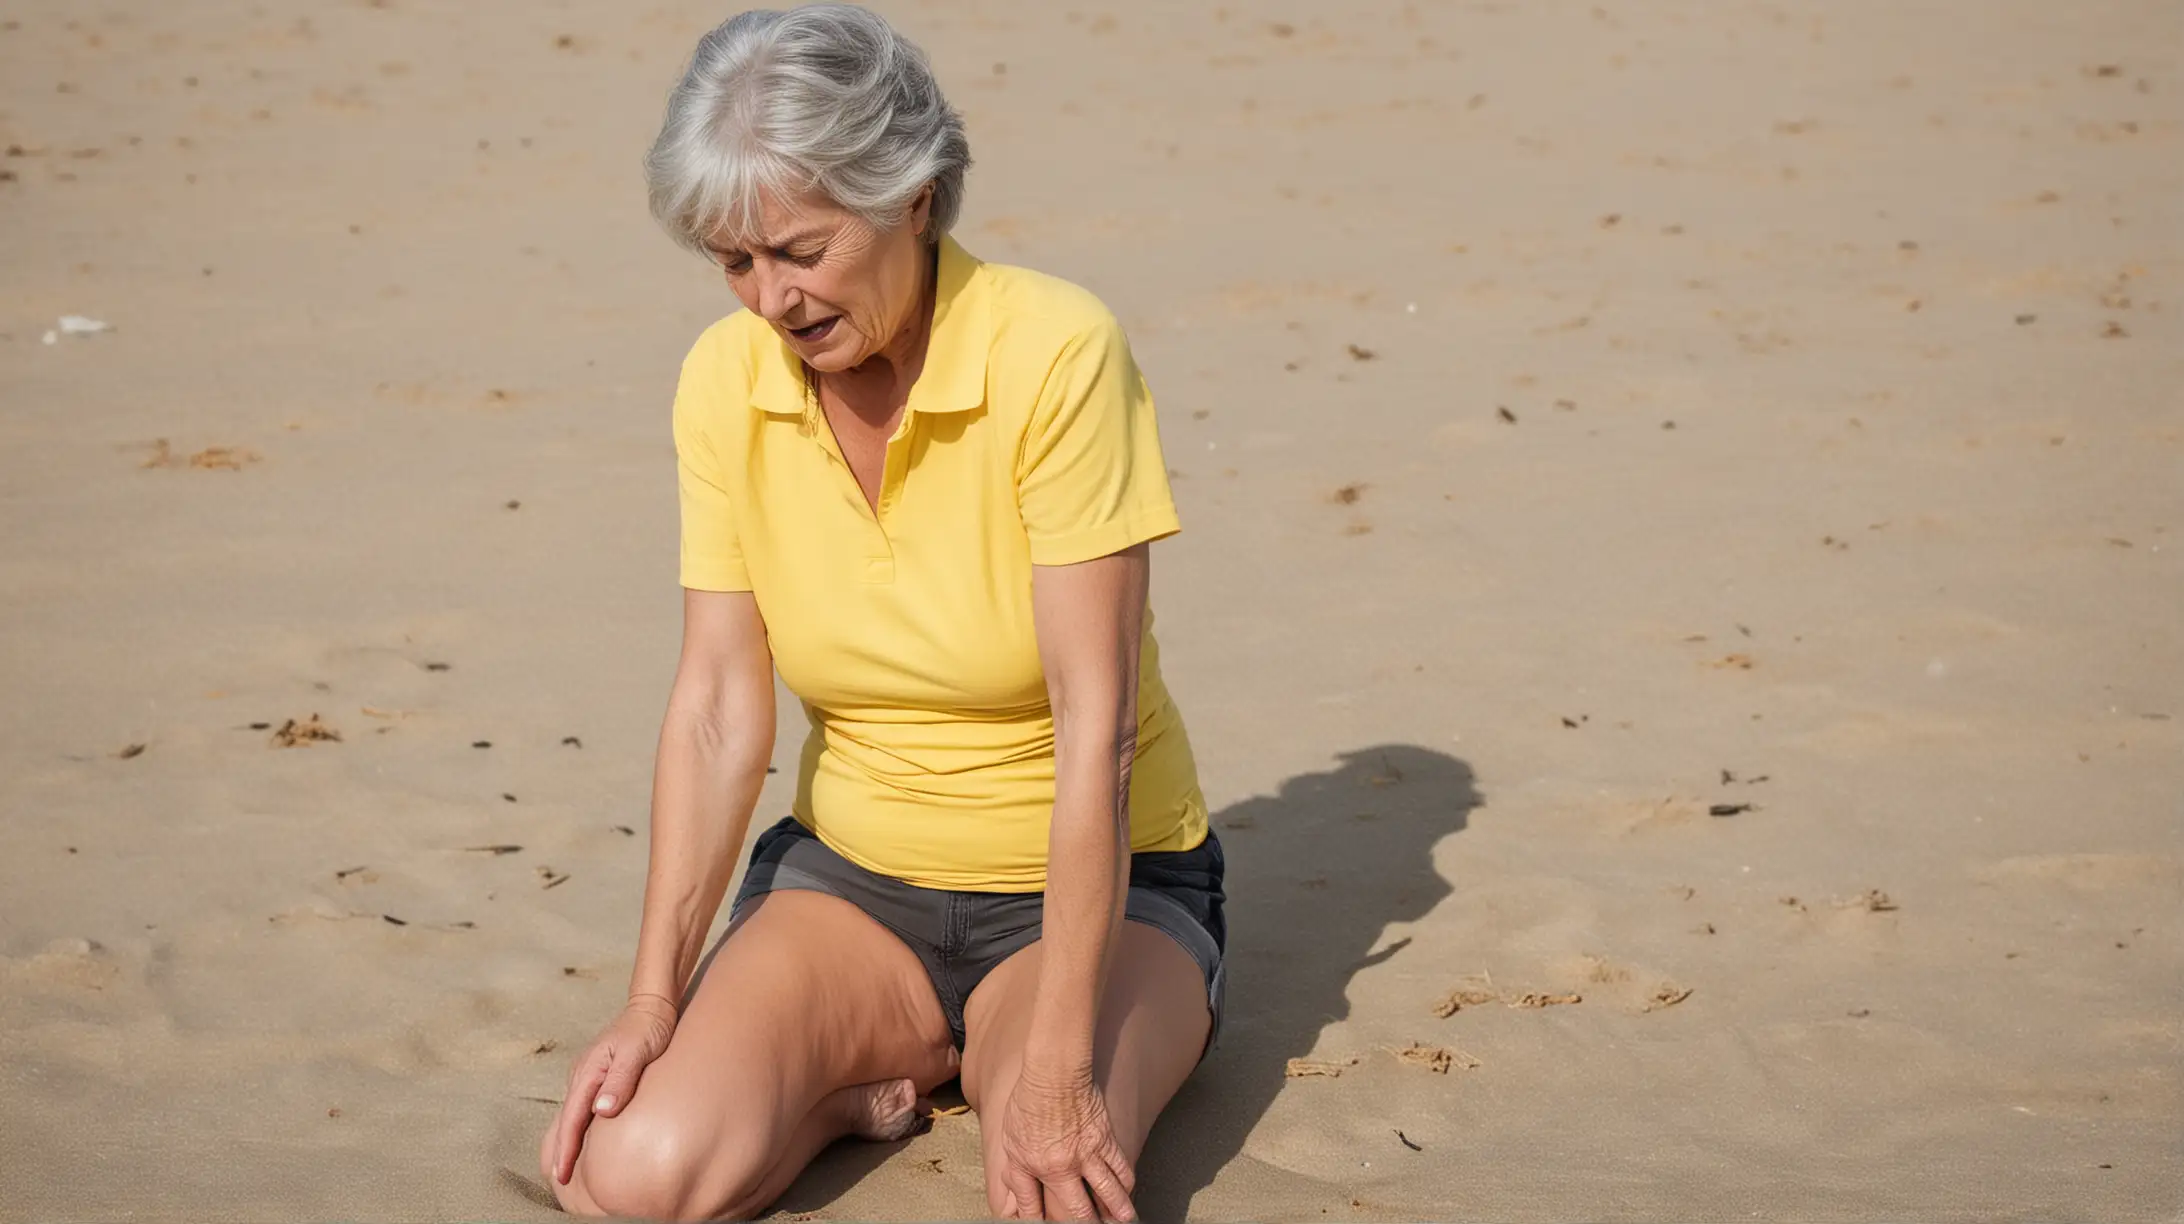 Elderly Woman Experiencing Knee Pain on Beach in Yellow Shirt